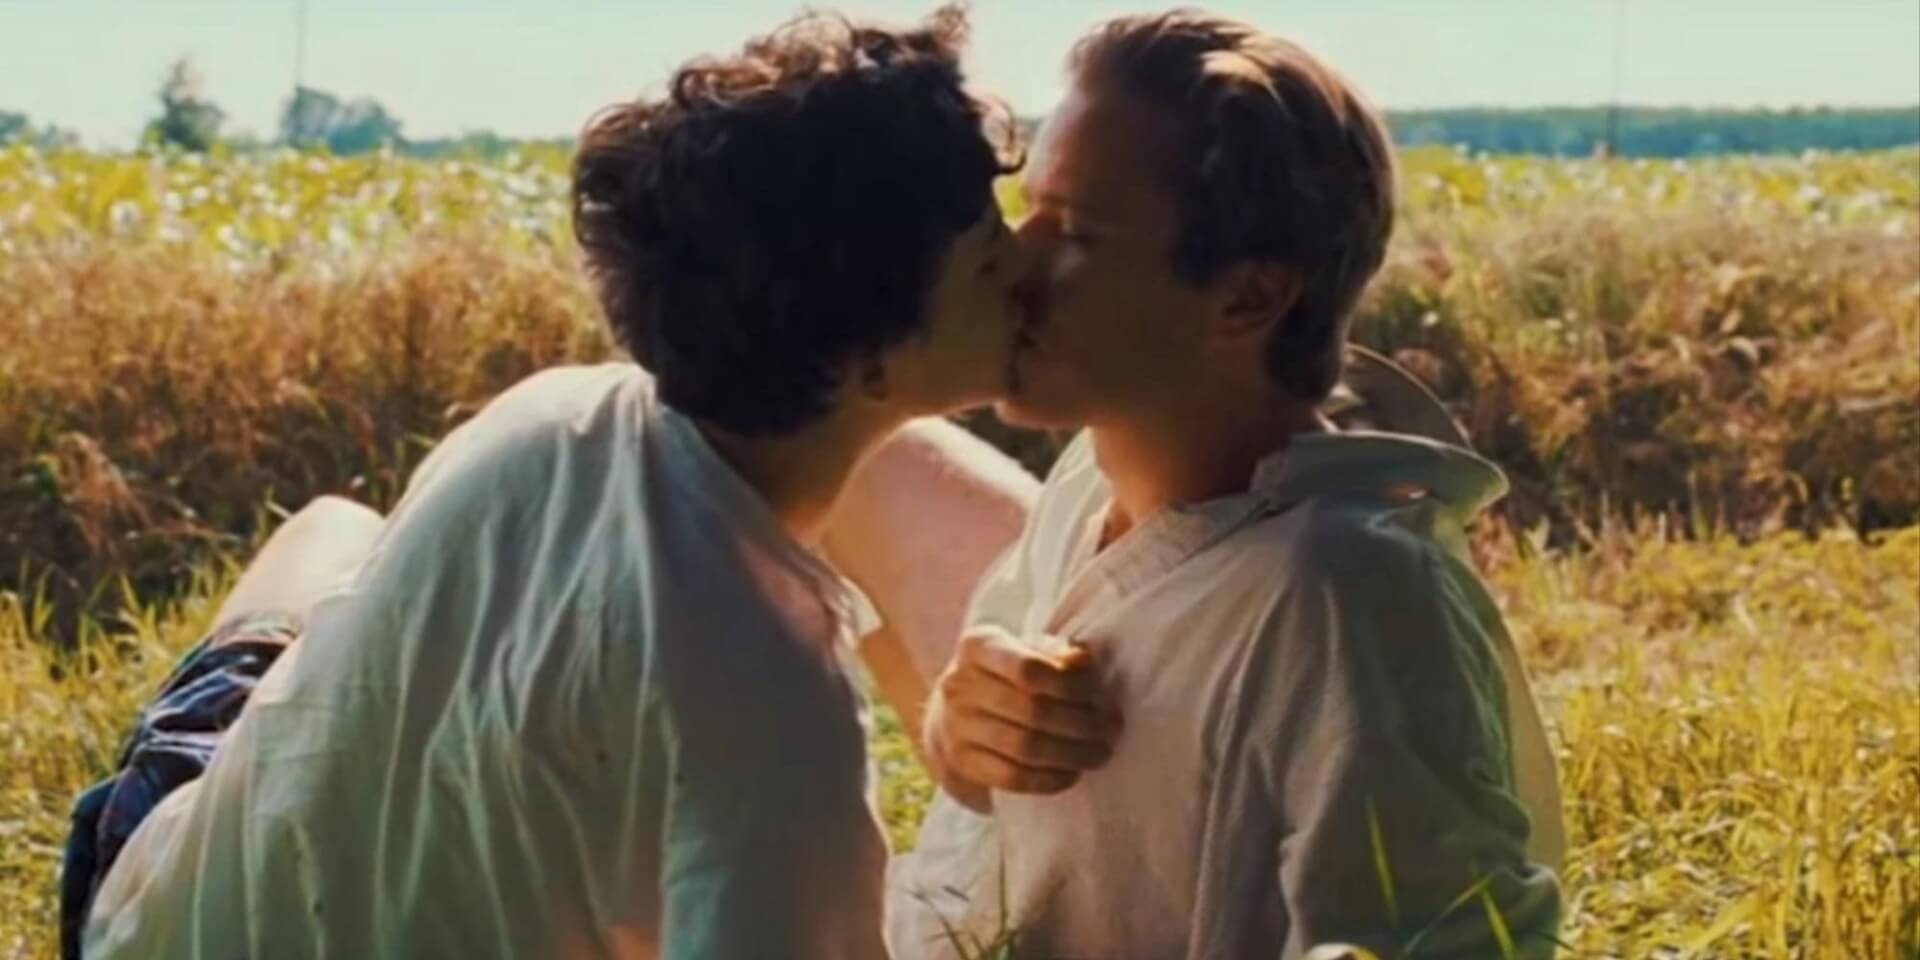 call me by your name armie hammer Timothée Chalamet kiss scene